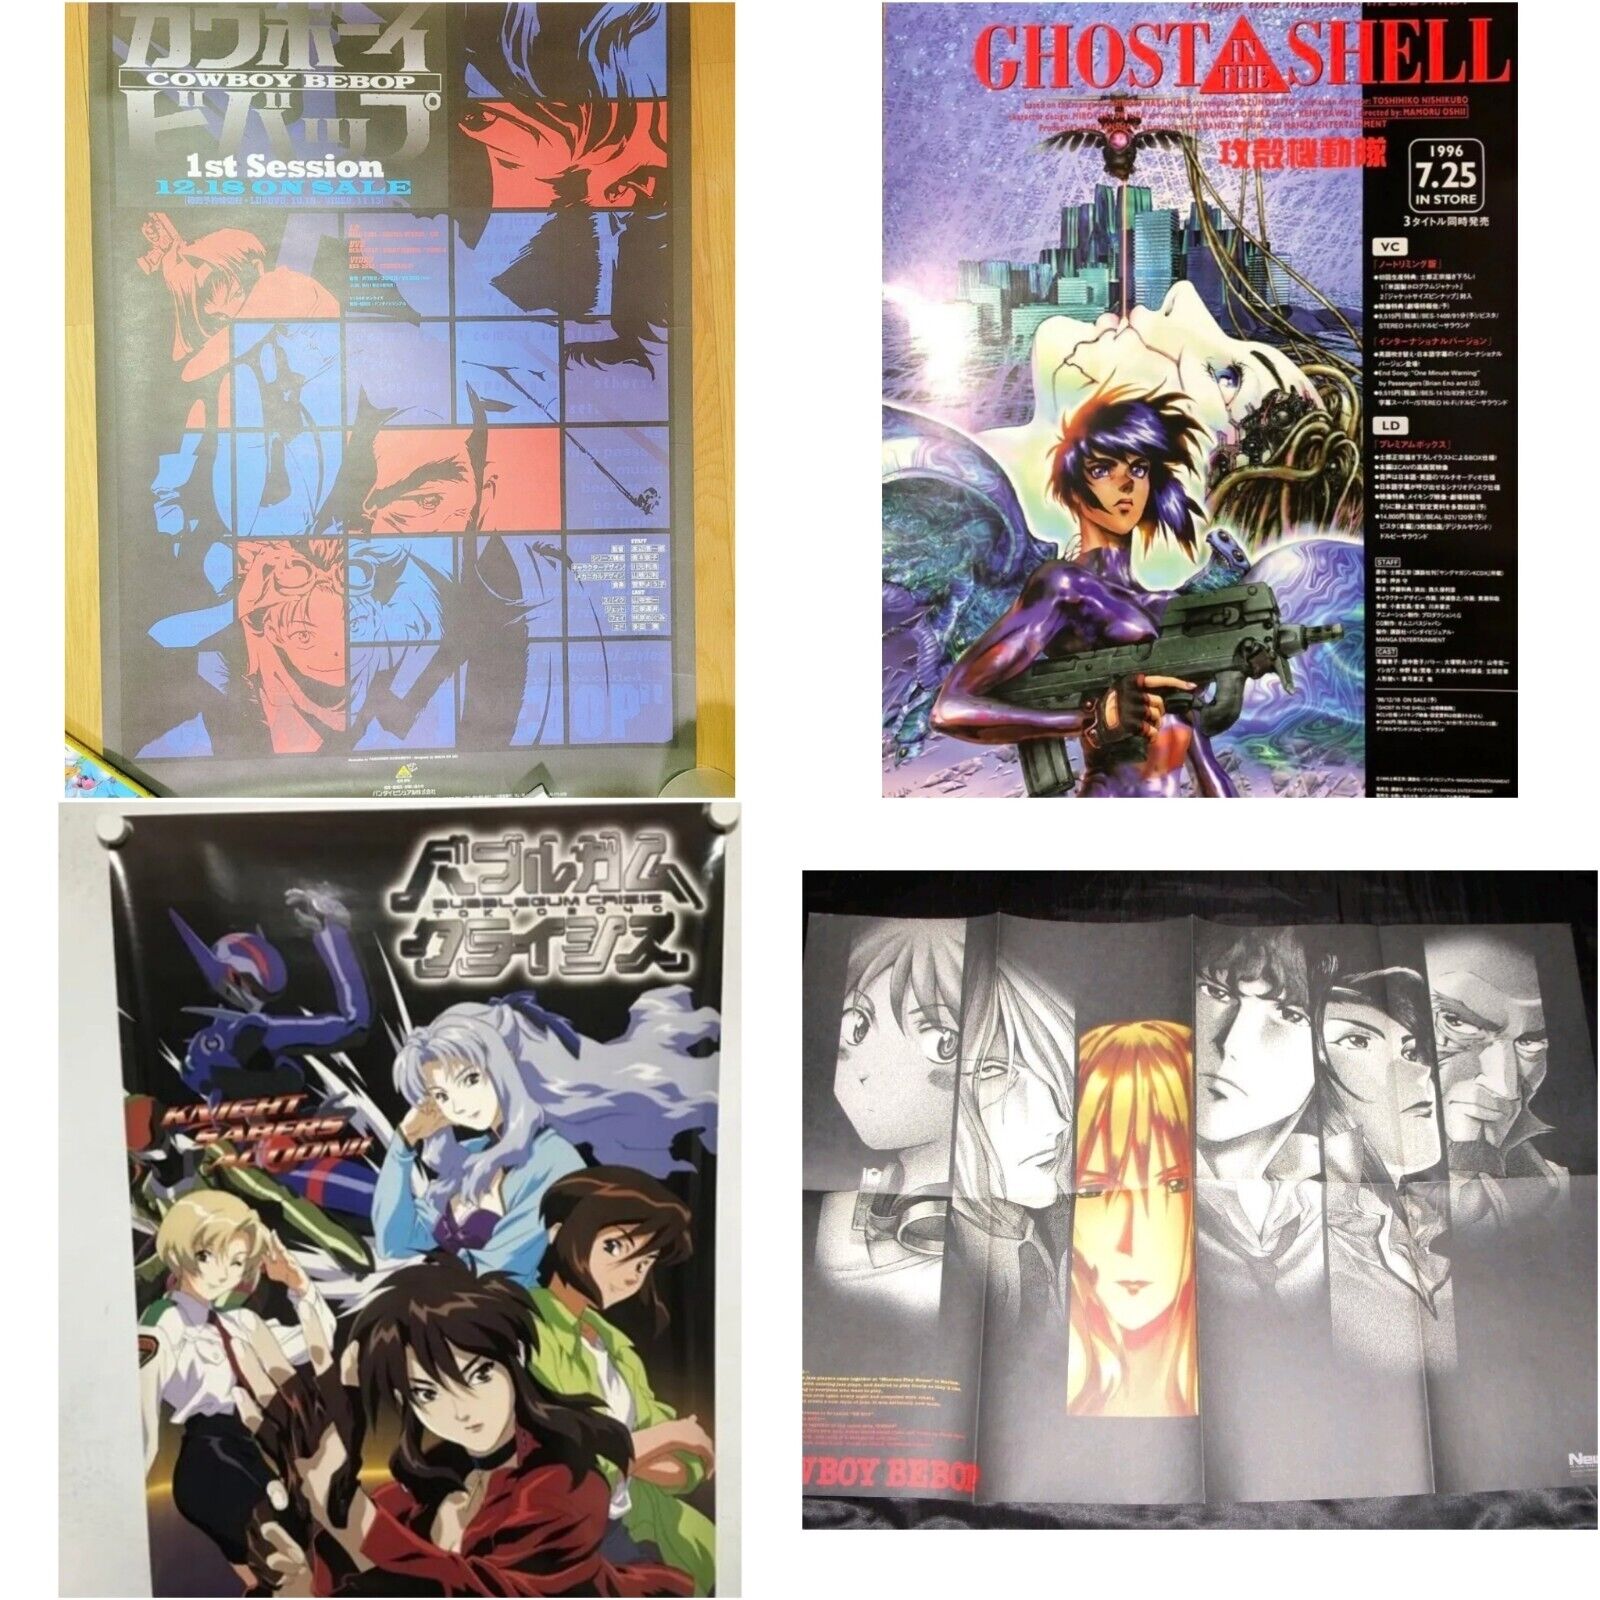 Ghost In The Shell Cowboy bebop Bubblegum Crisis Poster B2 vintage 90s Anime Set